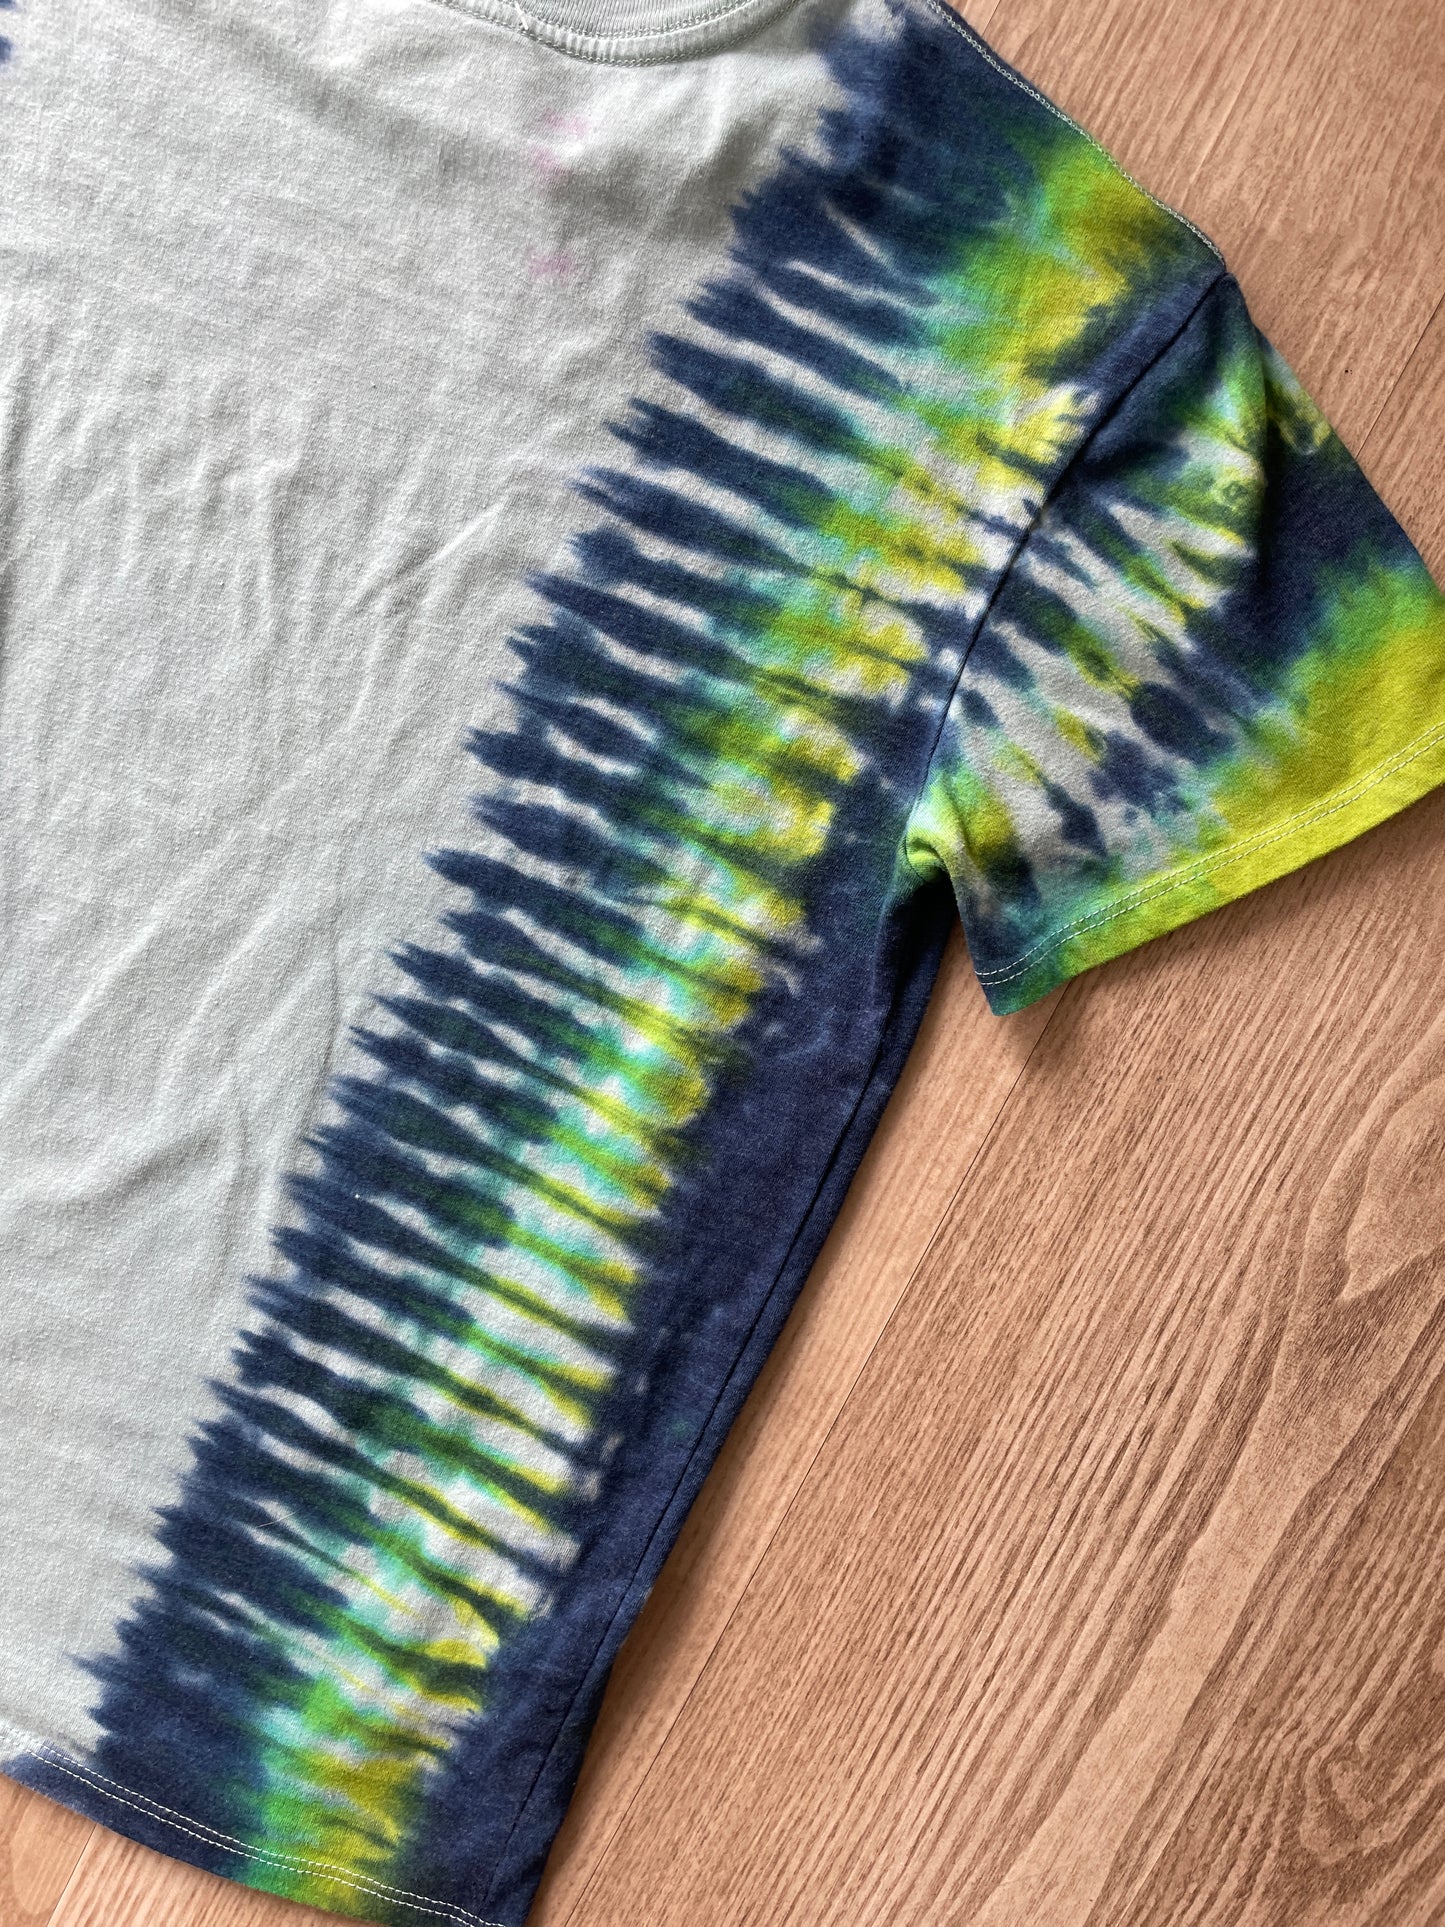 LARGE Women’s Yosemite California Mountainscape Handmade Tie Dye T-Shirt | One-Of-a-Kind Pastel Green and Blue Short Sleeve